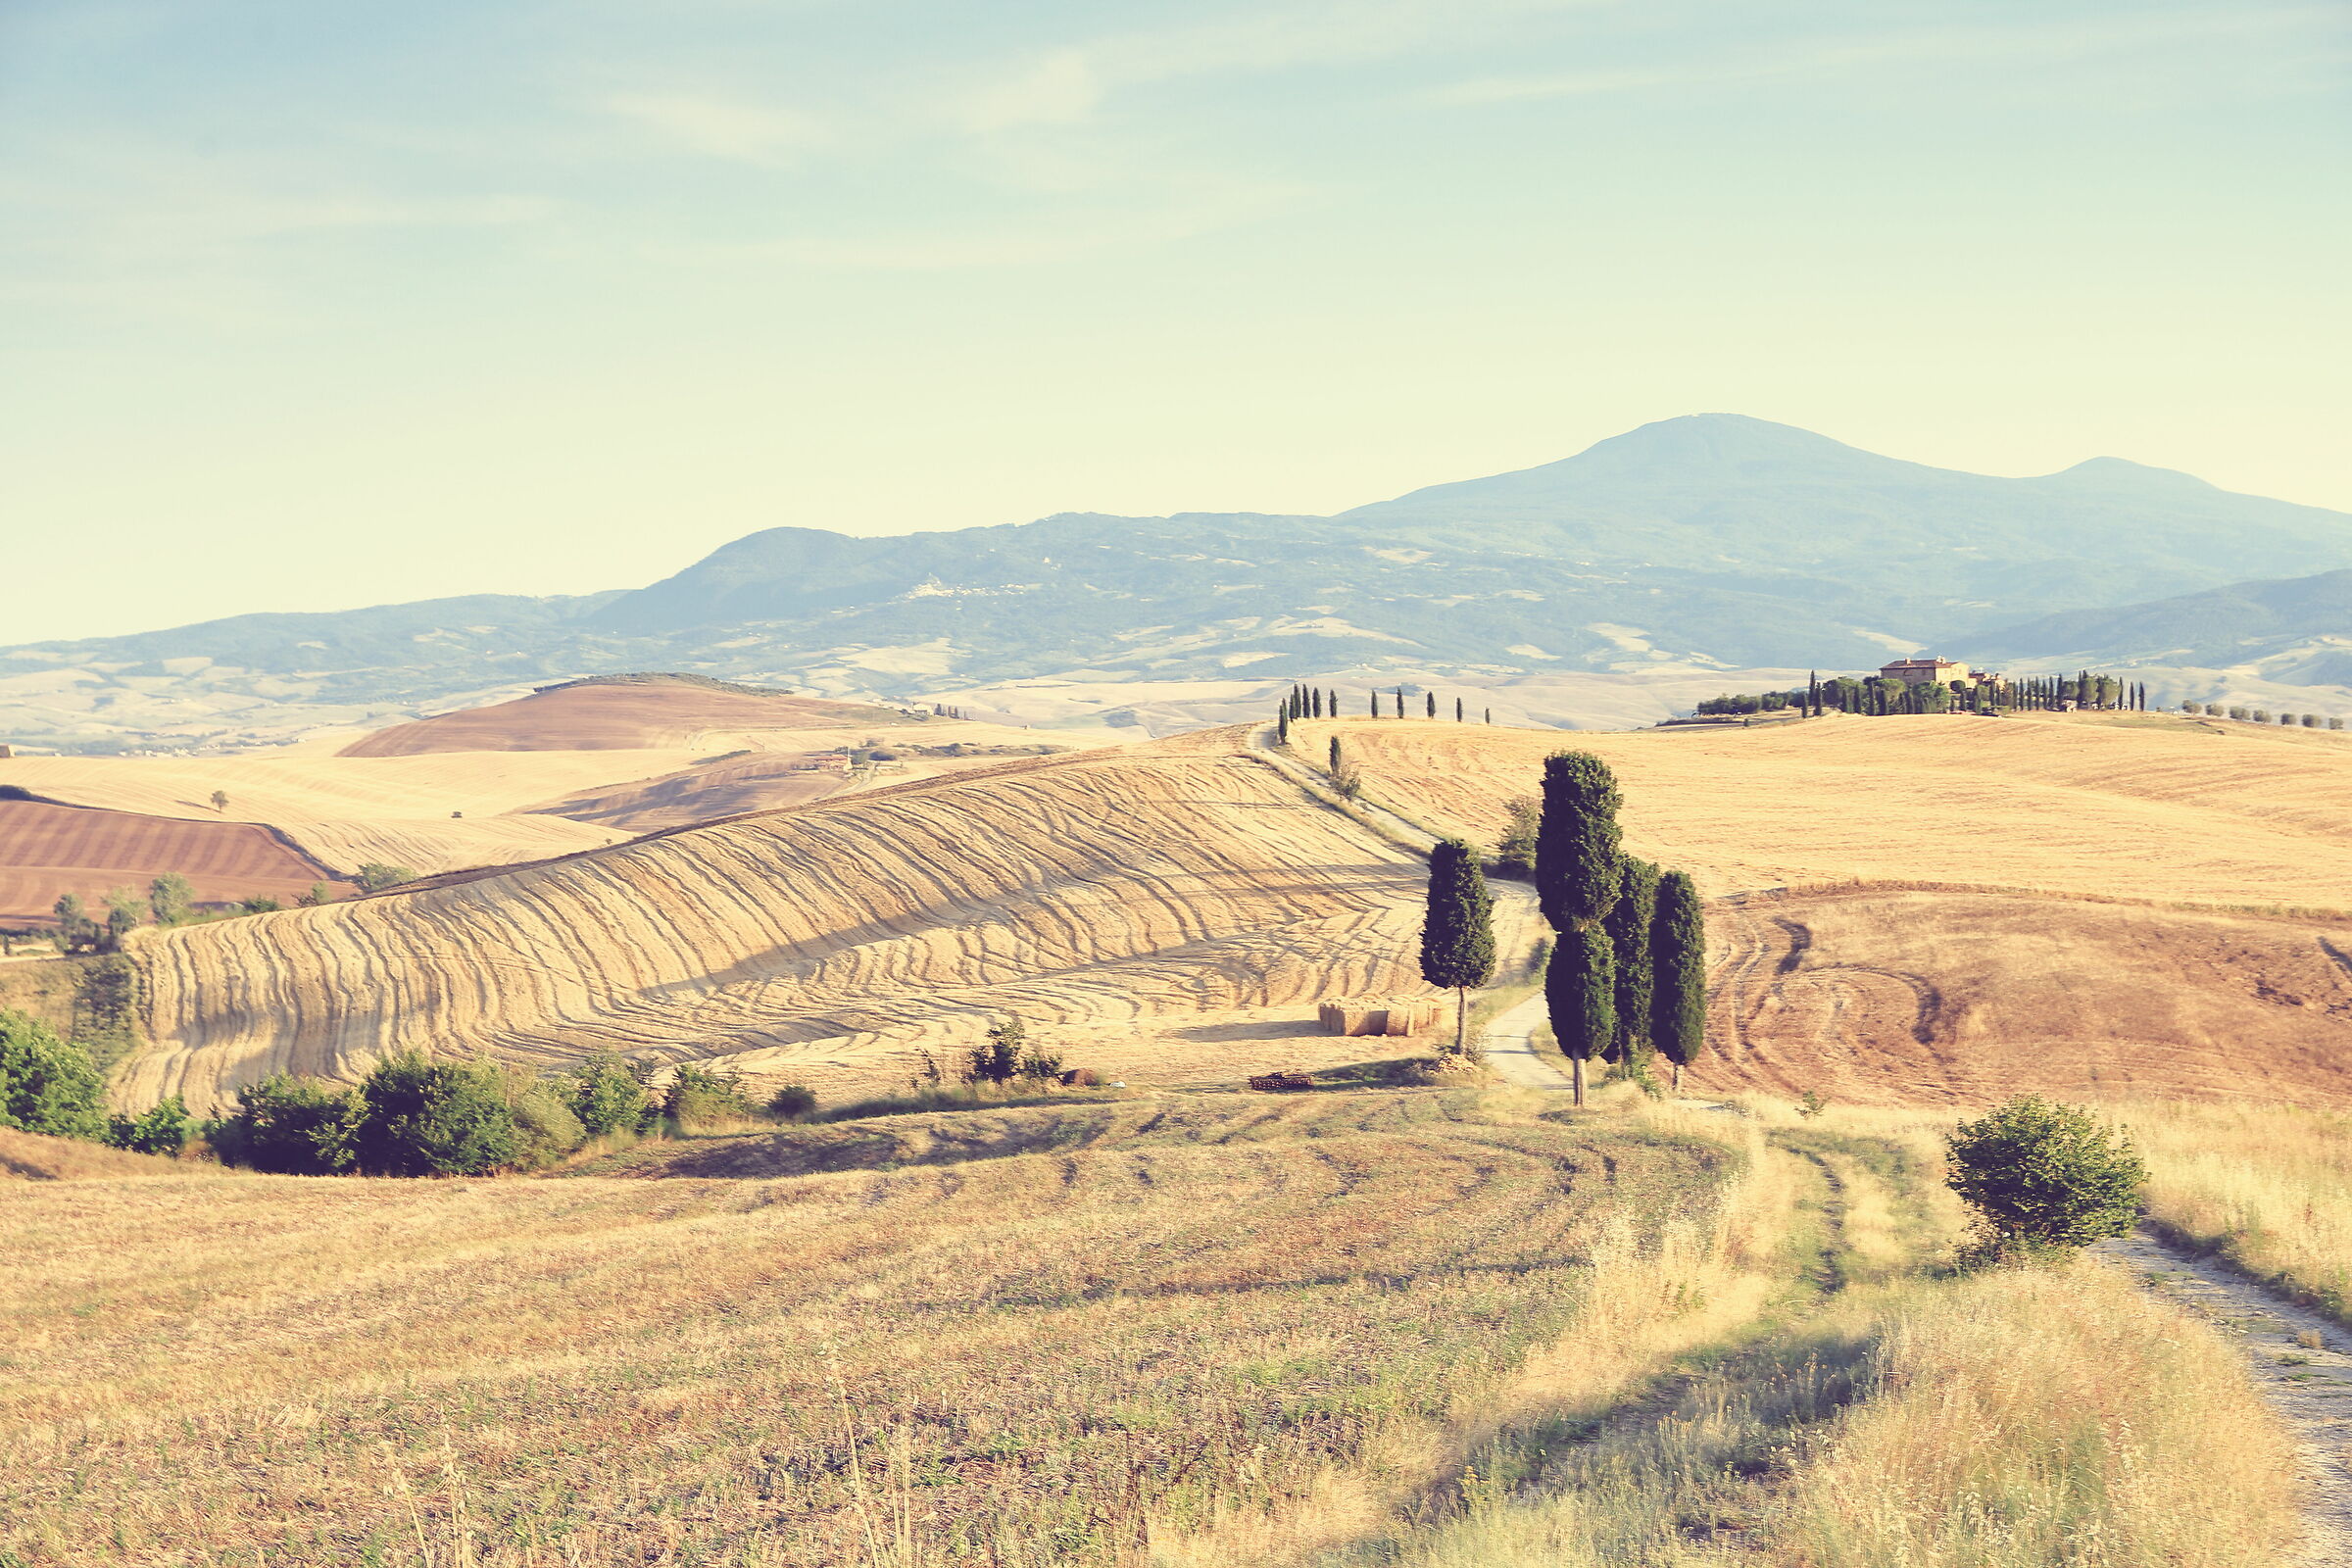 A Gladiator in Val d'Orcia...